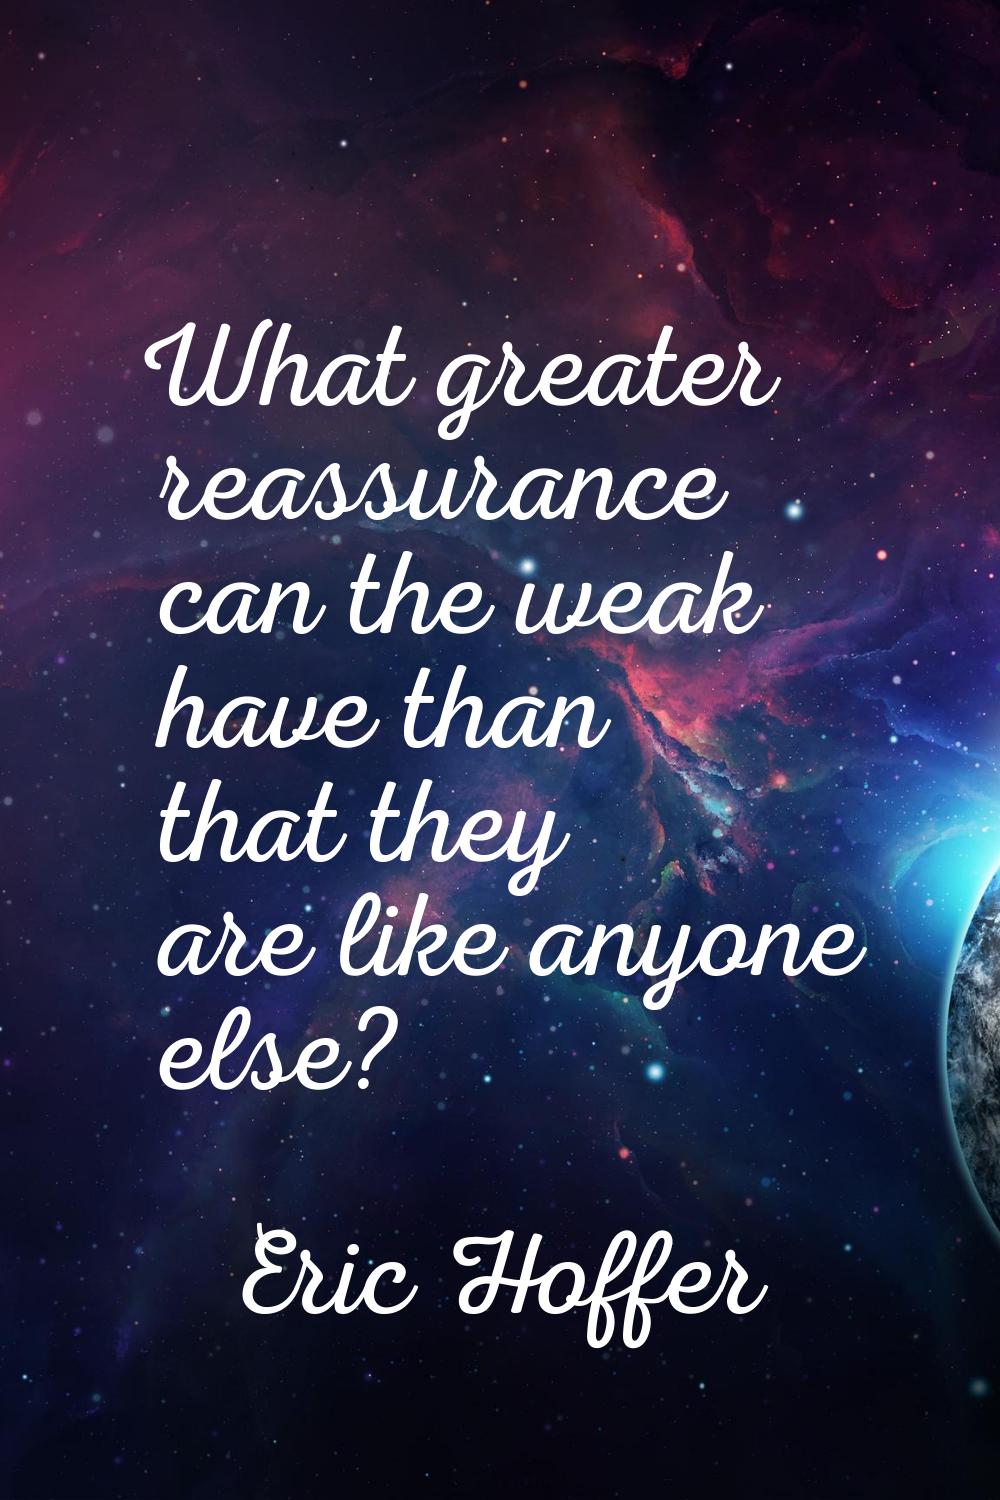 What greater reassurance can the weak have than that they are like anyone else?